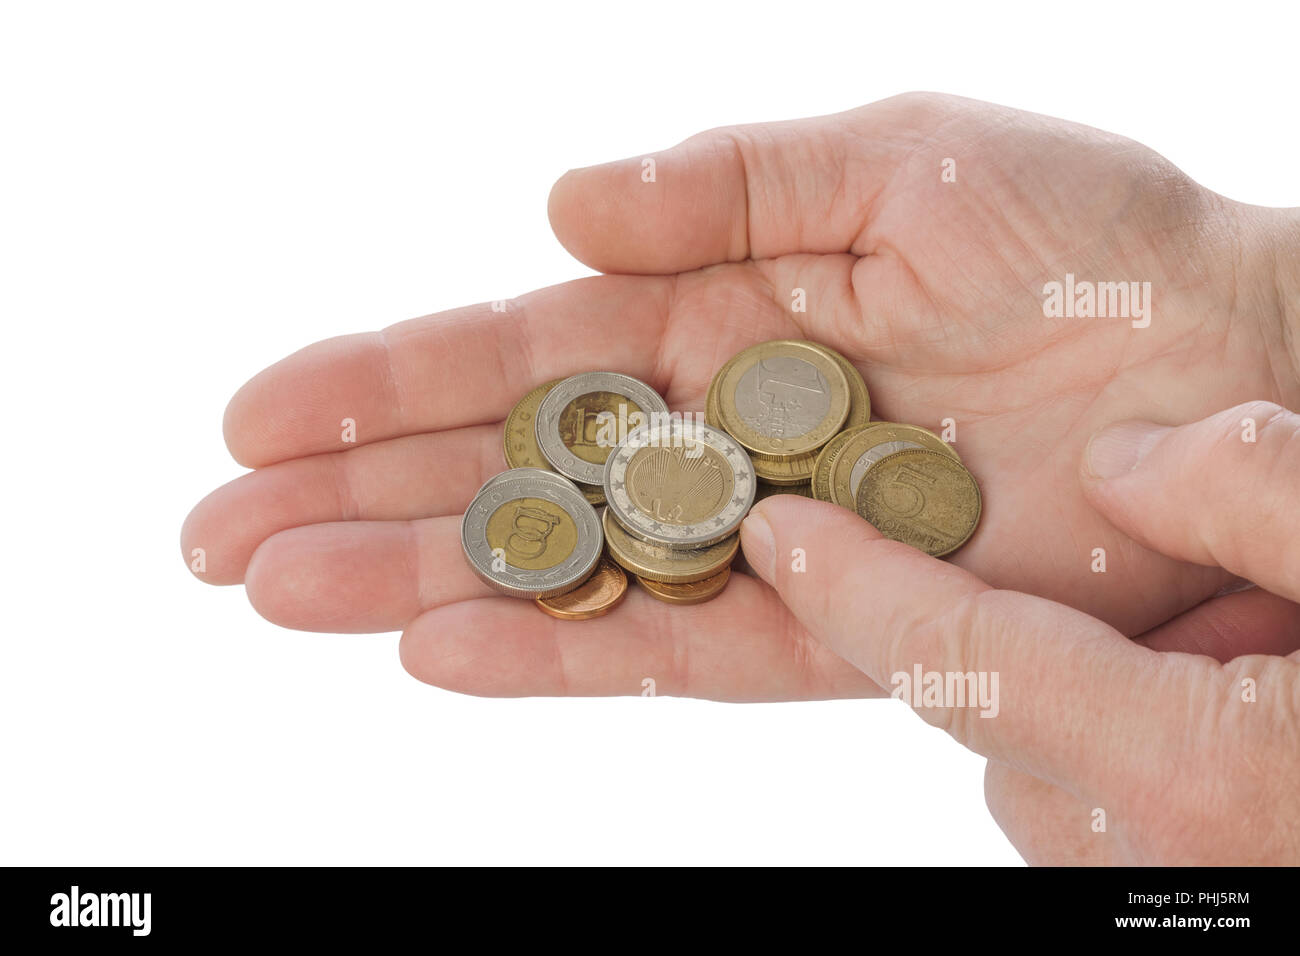 Hands of old man counting money Stock Photo